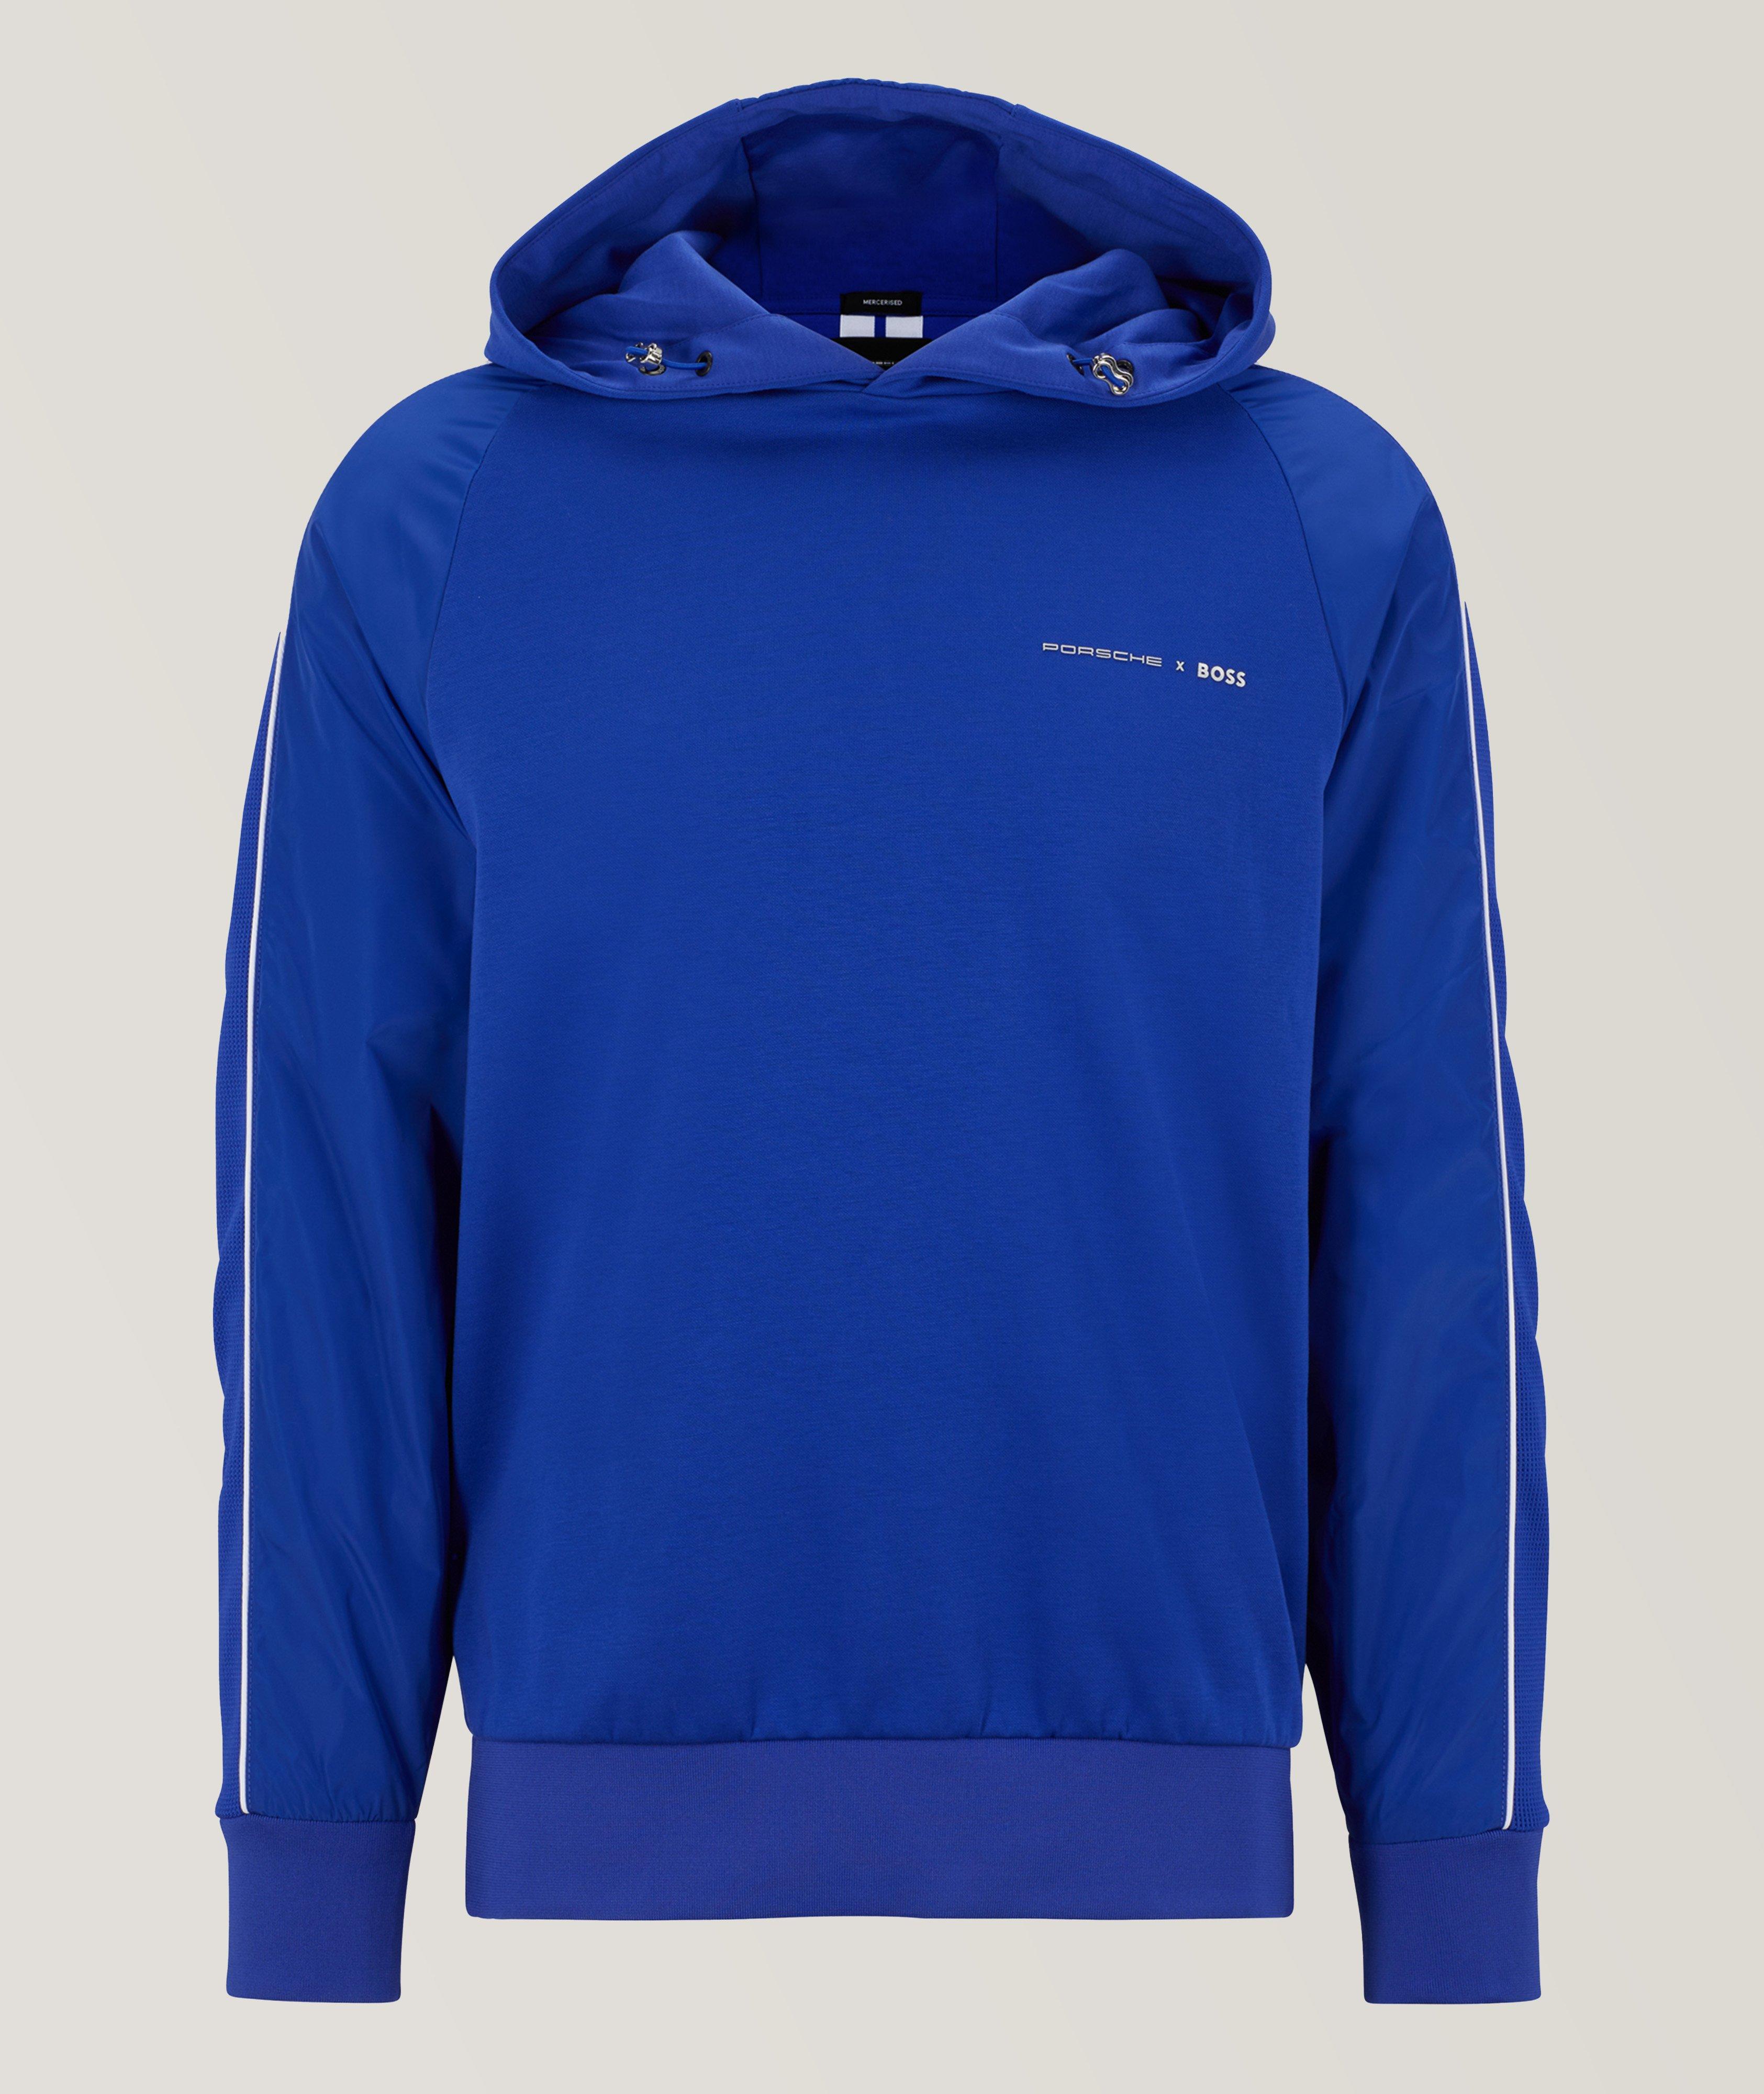 Porsche Collection Water-Repellent Cotton-Blend Hooded Sweater image 0